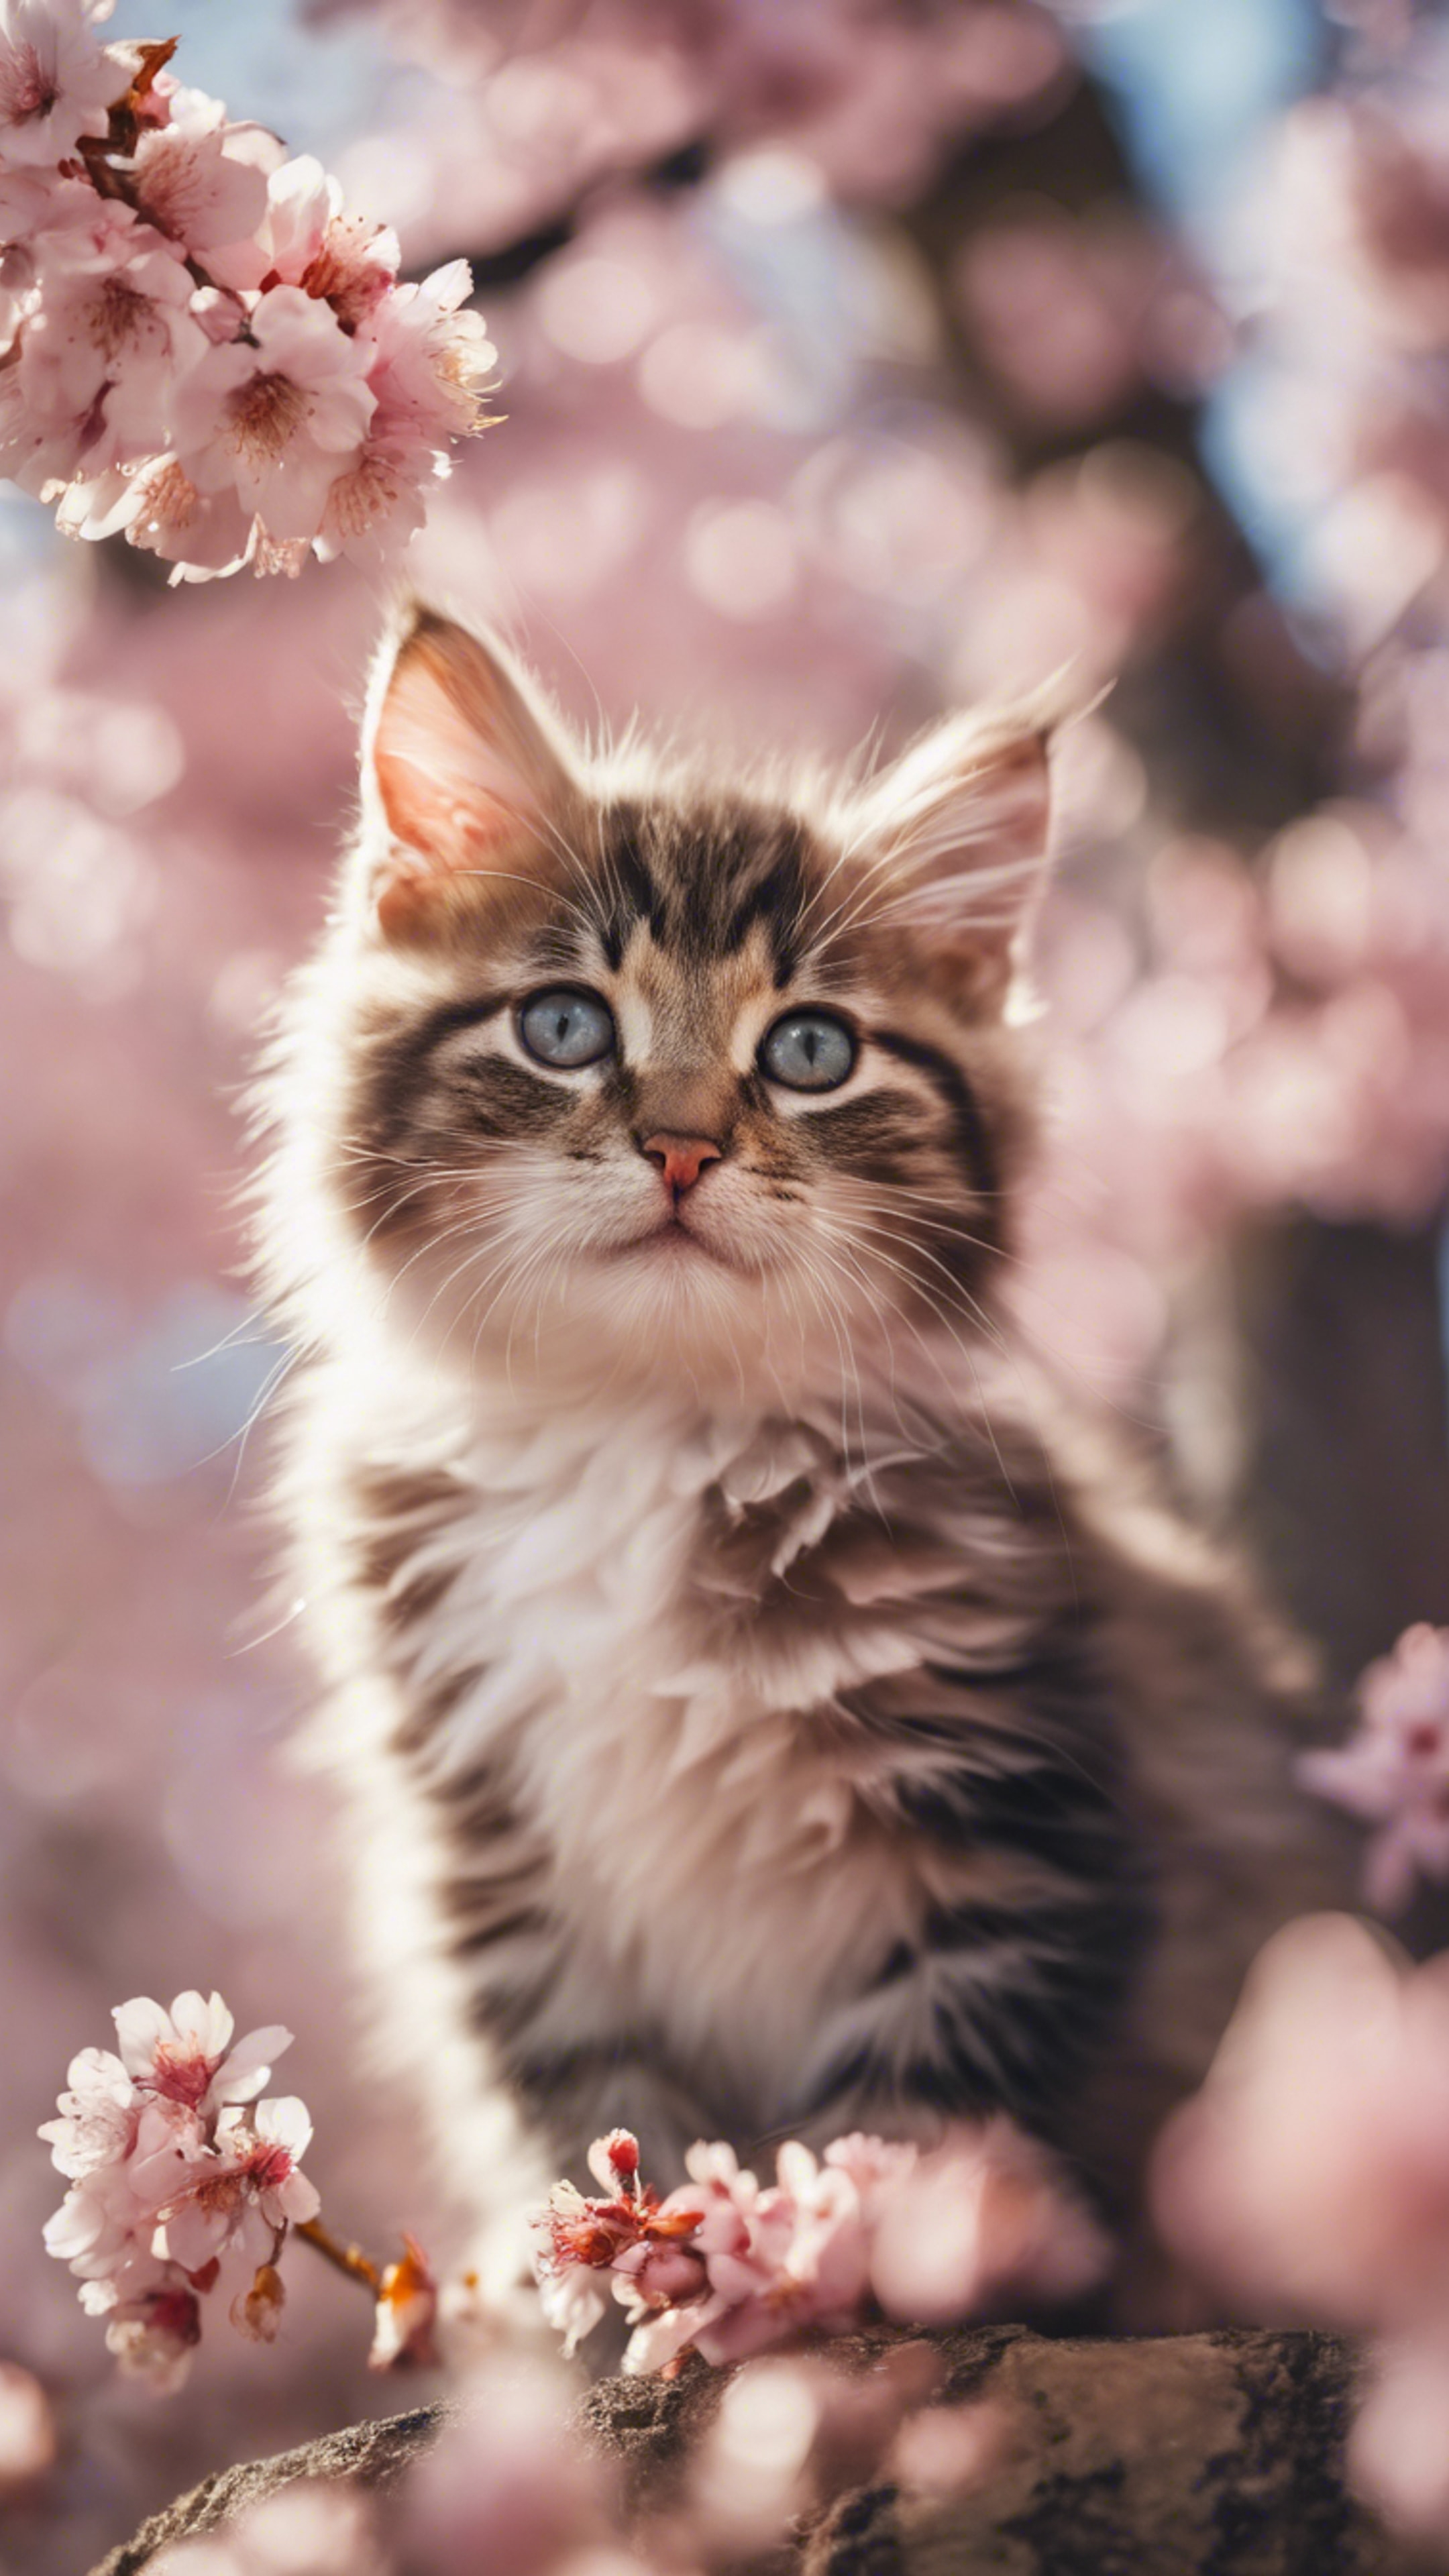 A cherry blossom tree in full bloom as the backdrop to a playful kitten in spring. Tapet[56e1c1b9132e46d98bd1]